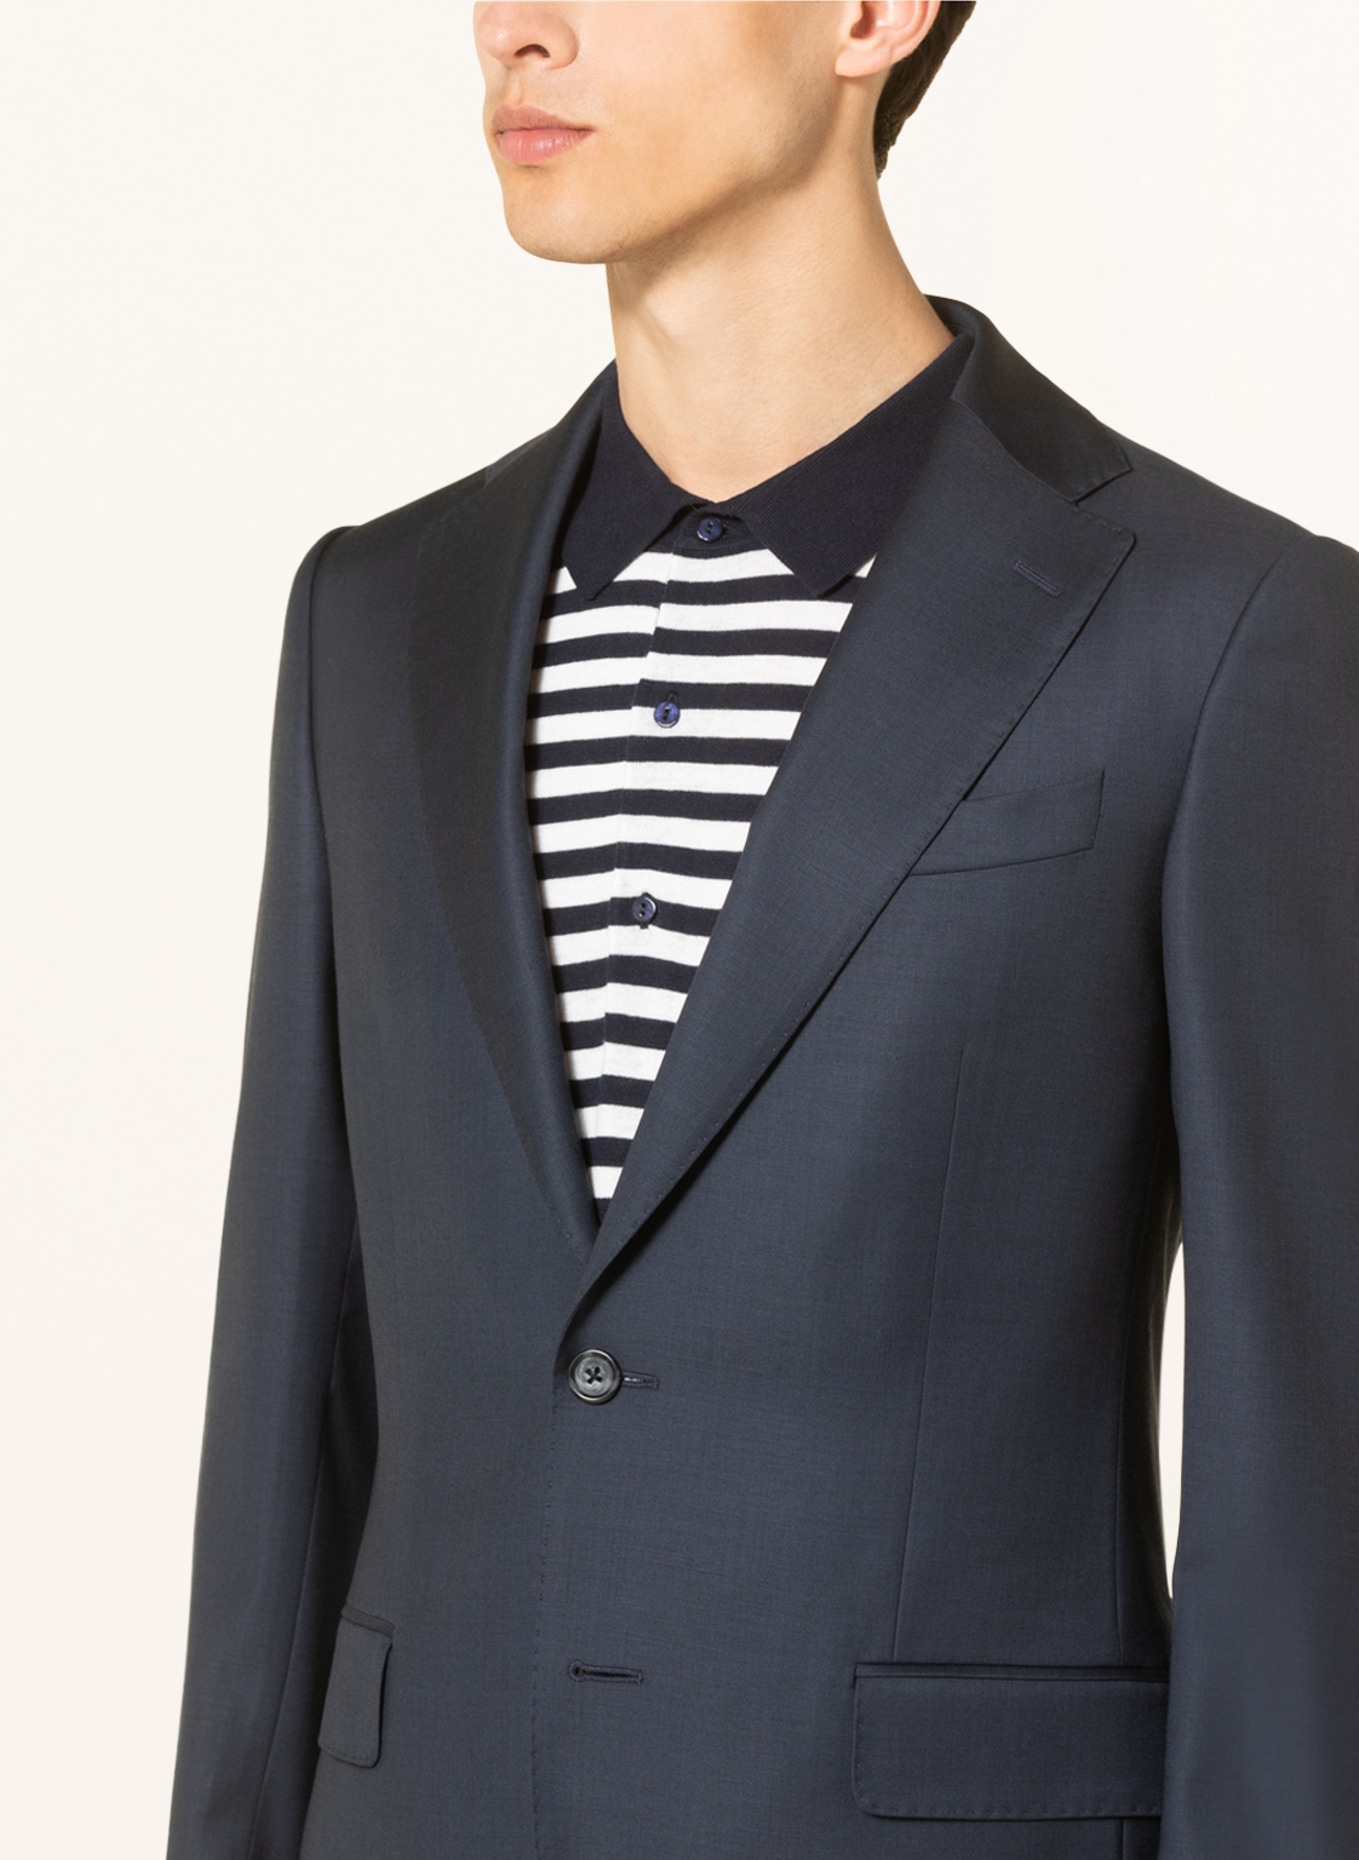 CHAS Suit jacket extra slim fit, Color: 1/176 Navy (Image 5)